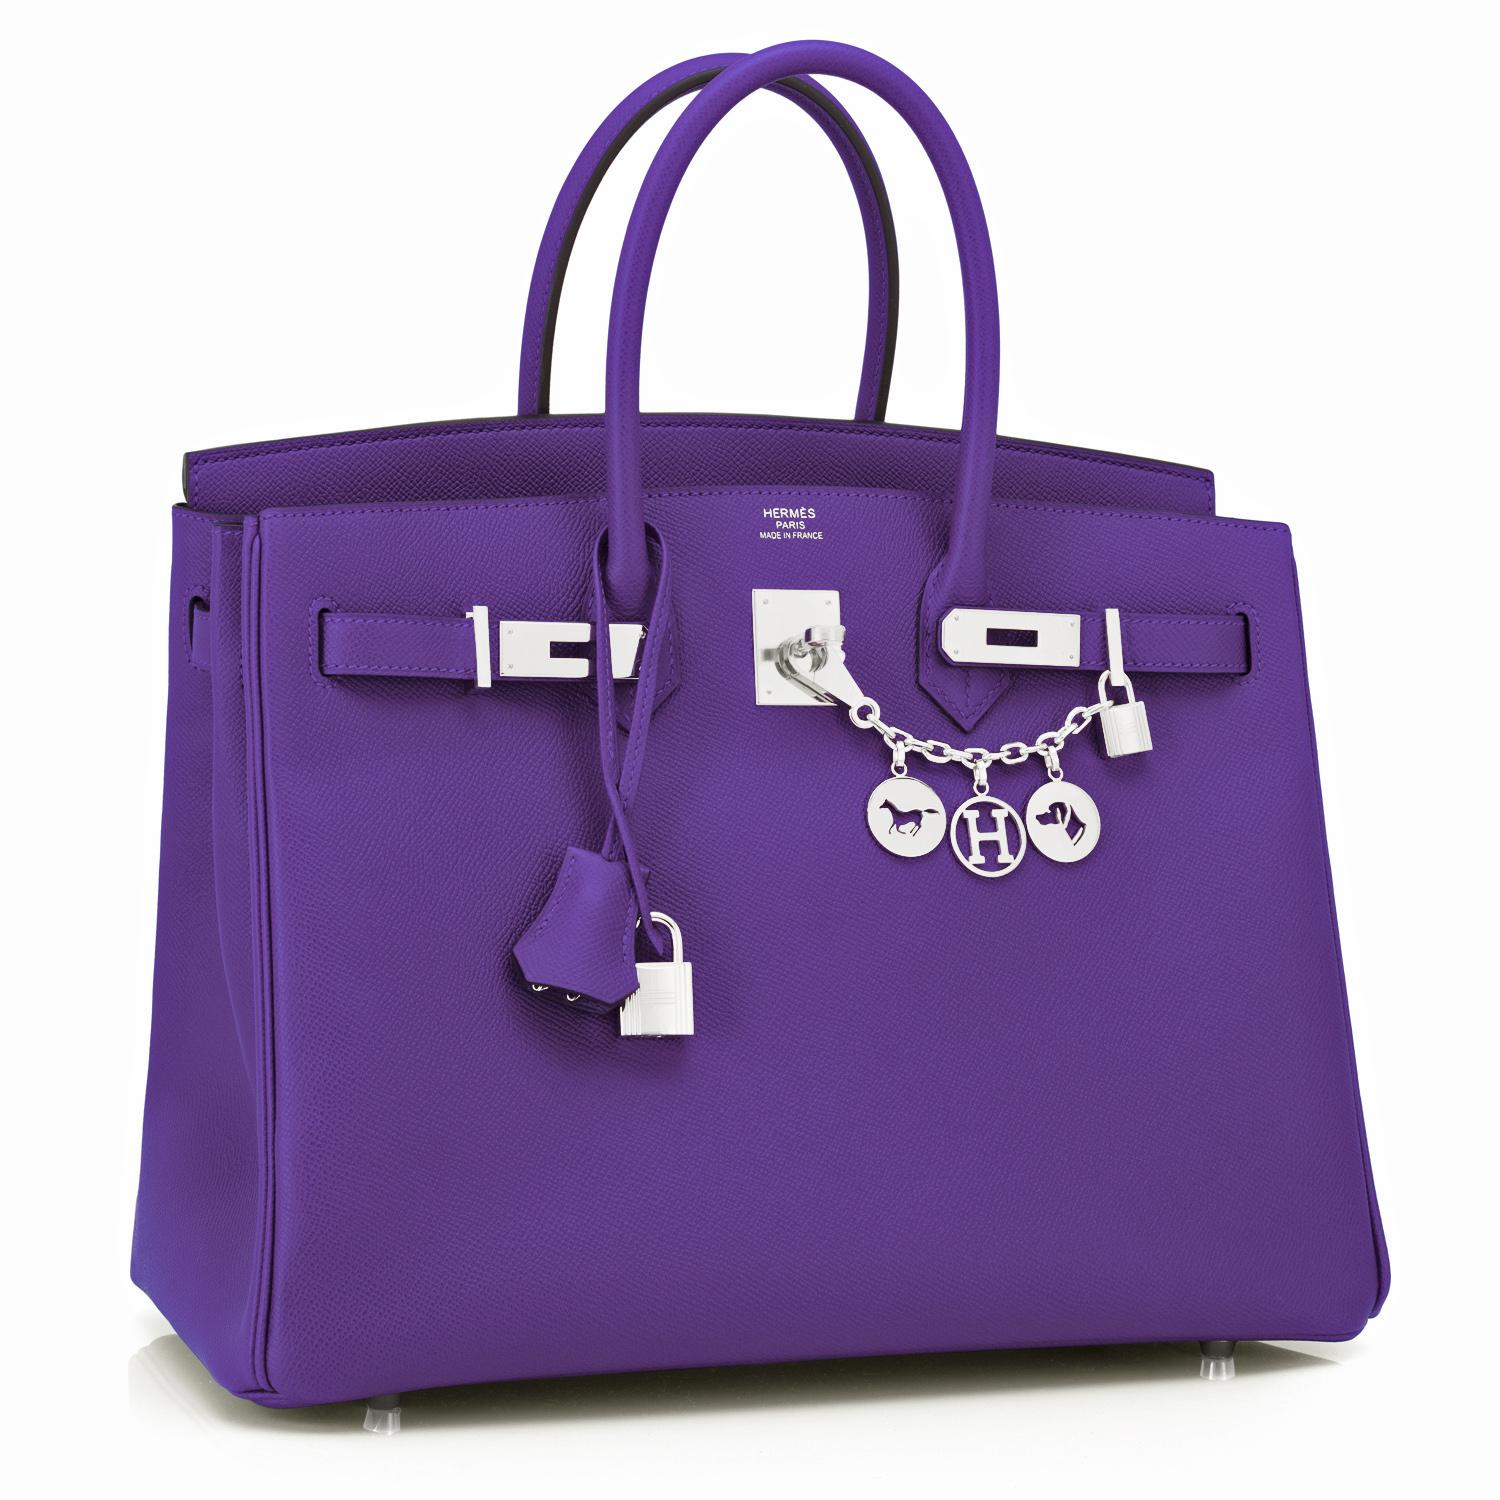 Hermes Birkin 35cm Crocus Deep Purple Epsom Bag Palladium Hardware NEW RARE
Absolutely ravishing! Crocus is a deep jewel-toned purple that has been long discontinued in production.
Very rare find in New or Never Worn, Pristine condition (with